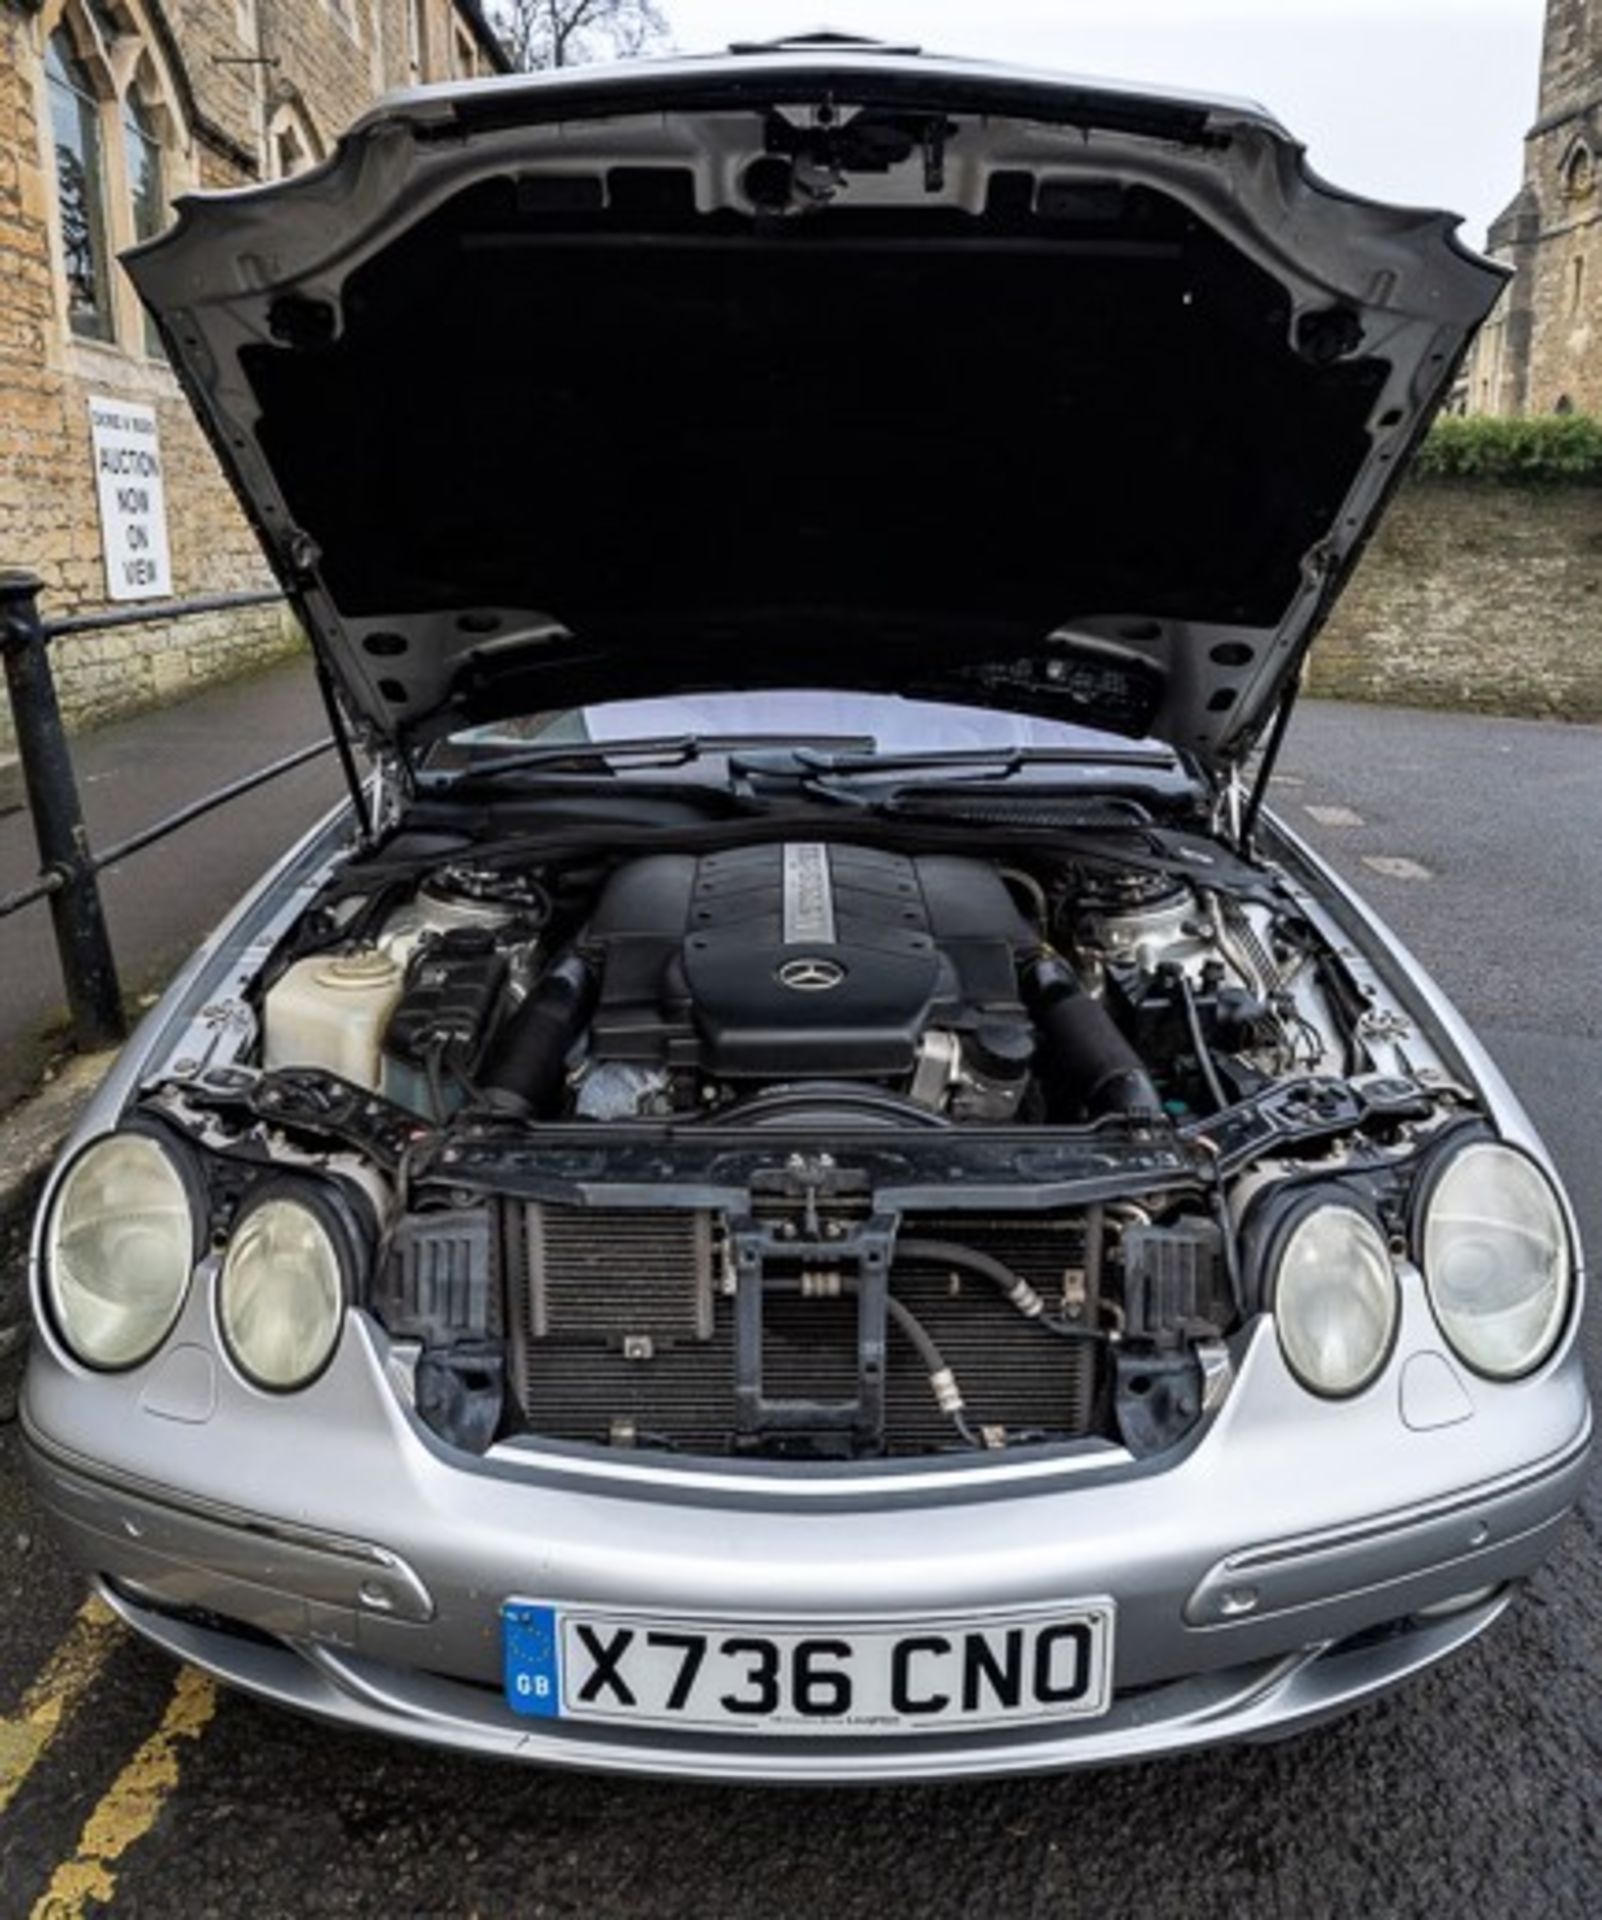 2000 Mercedes CL500 Coupe - Image 13 of 13